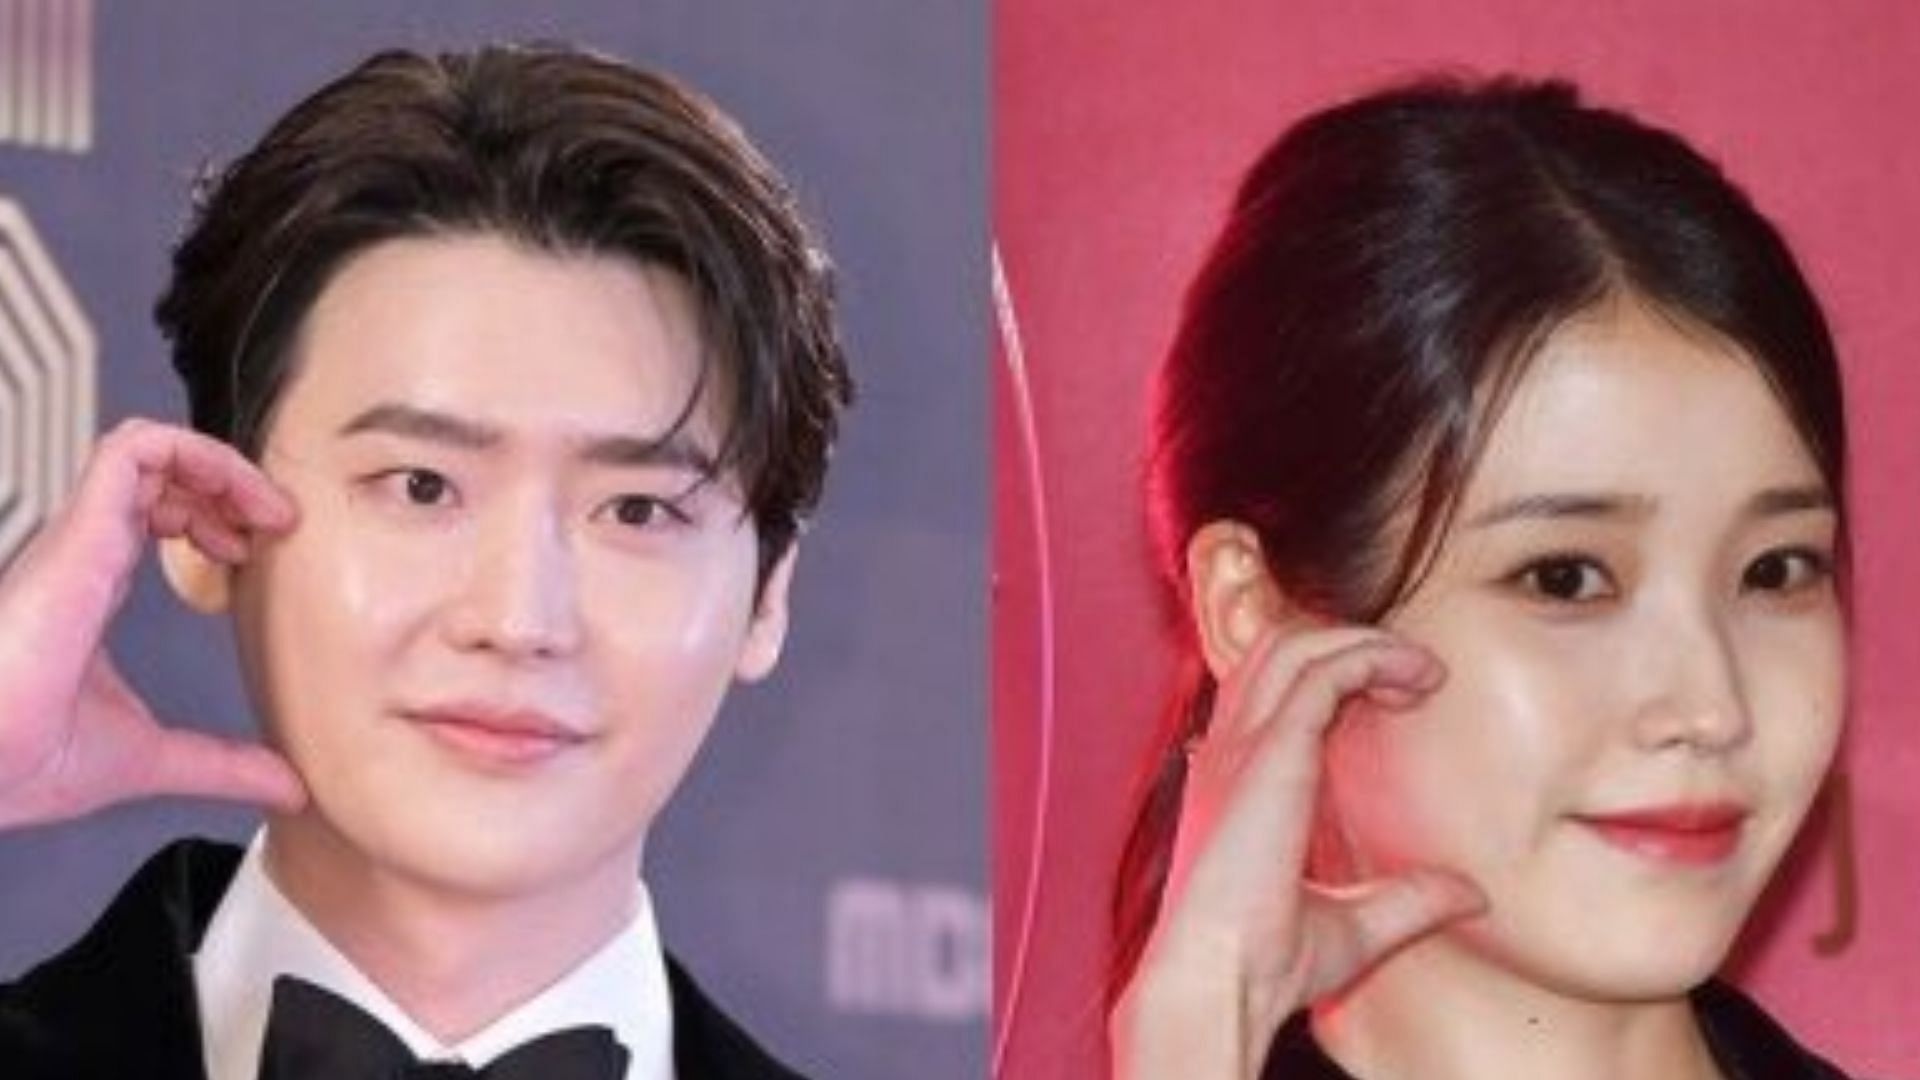 Lee Jong-suk compares IU to Kang Dani-i in a fan letter (Image via Twitter/@iconickdramas)